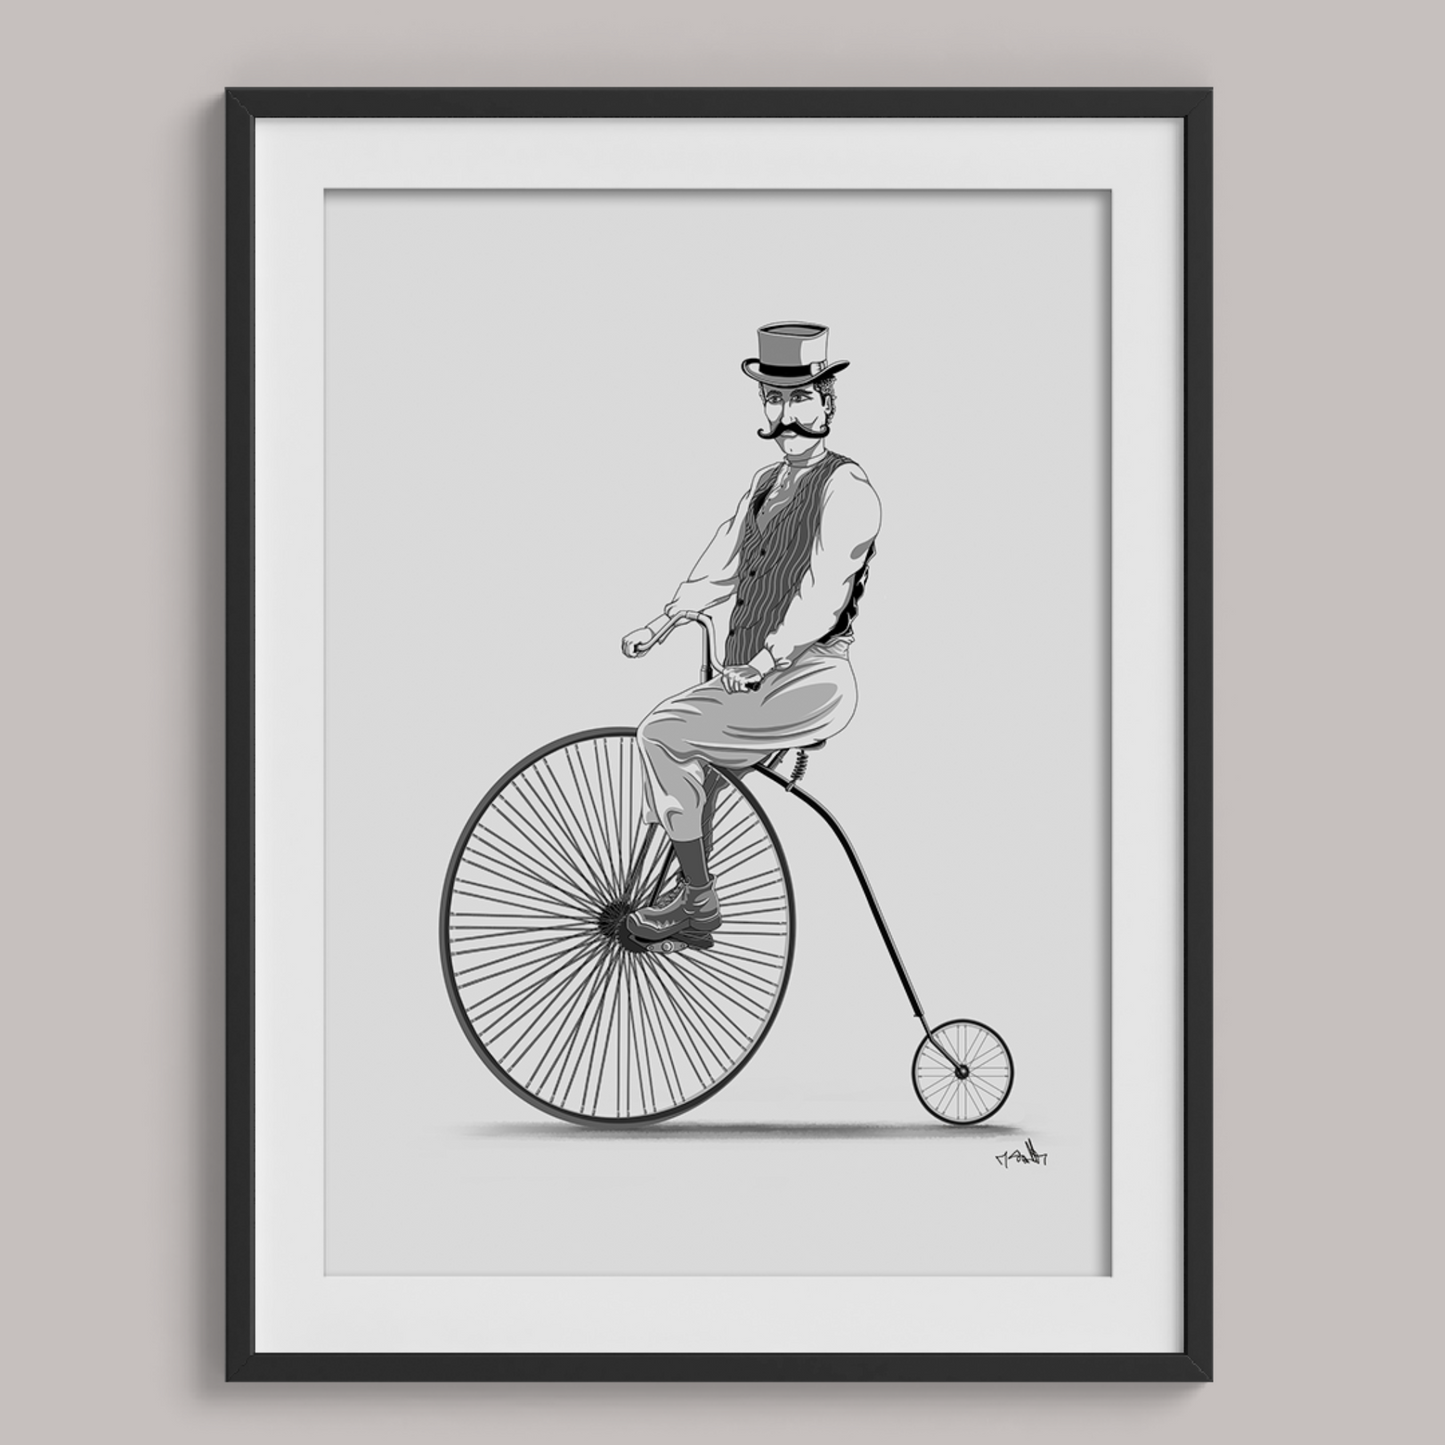 Cycle And Stache | Print 004